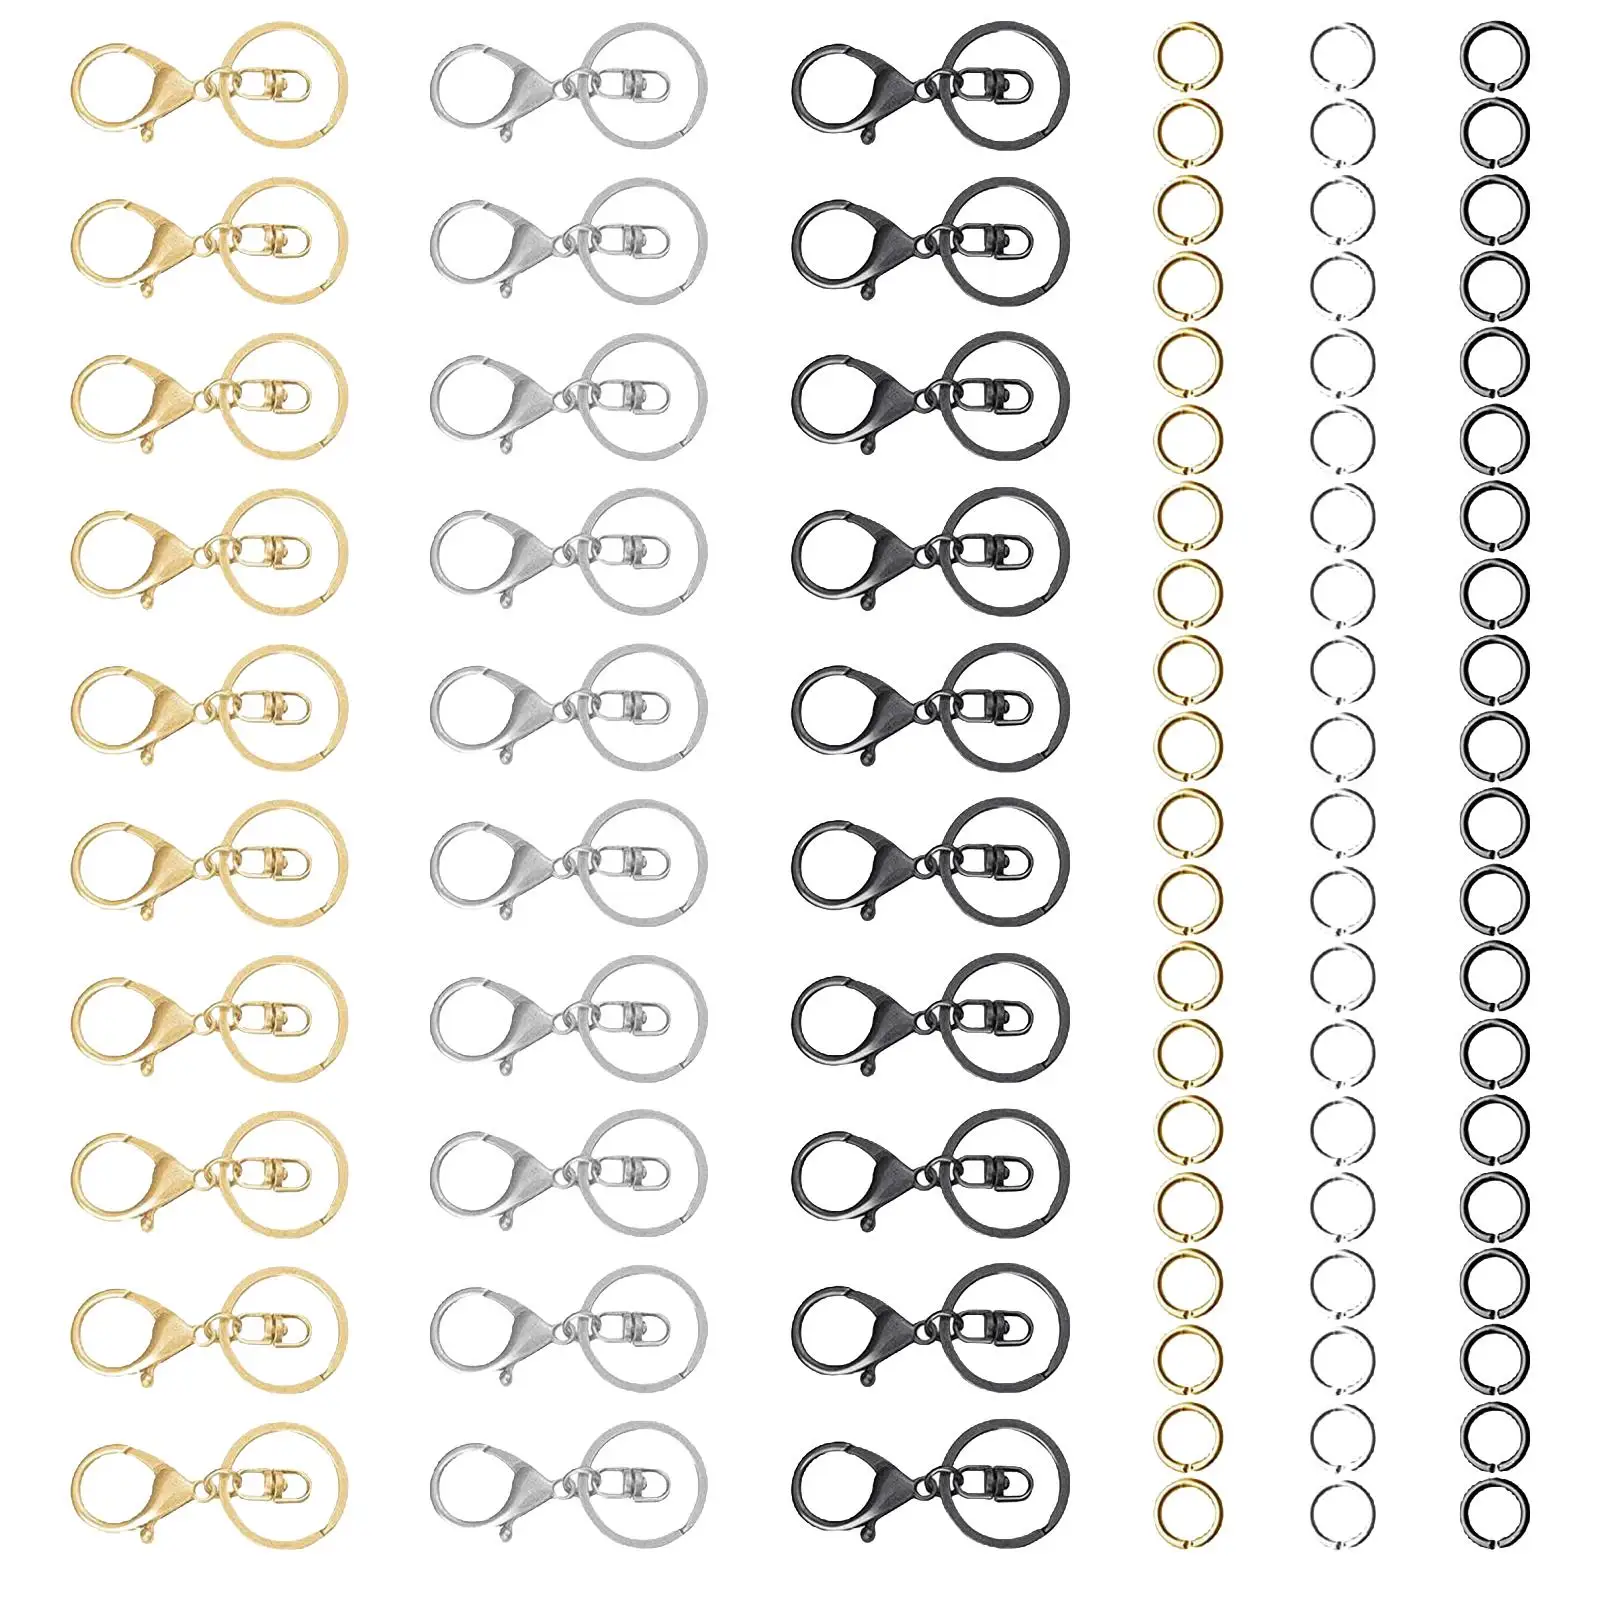 90x Lobster Claw Clasps Keychain Keys Lanyard Connector Metal Open Jump Rings for Keys Findings Bag Supplies Keyrings DIY Crafts